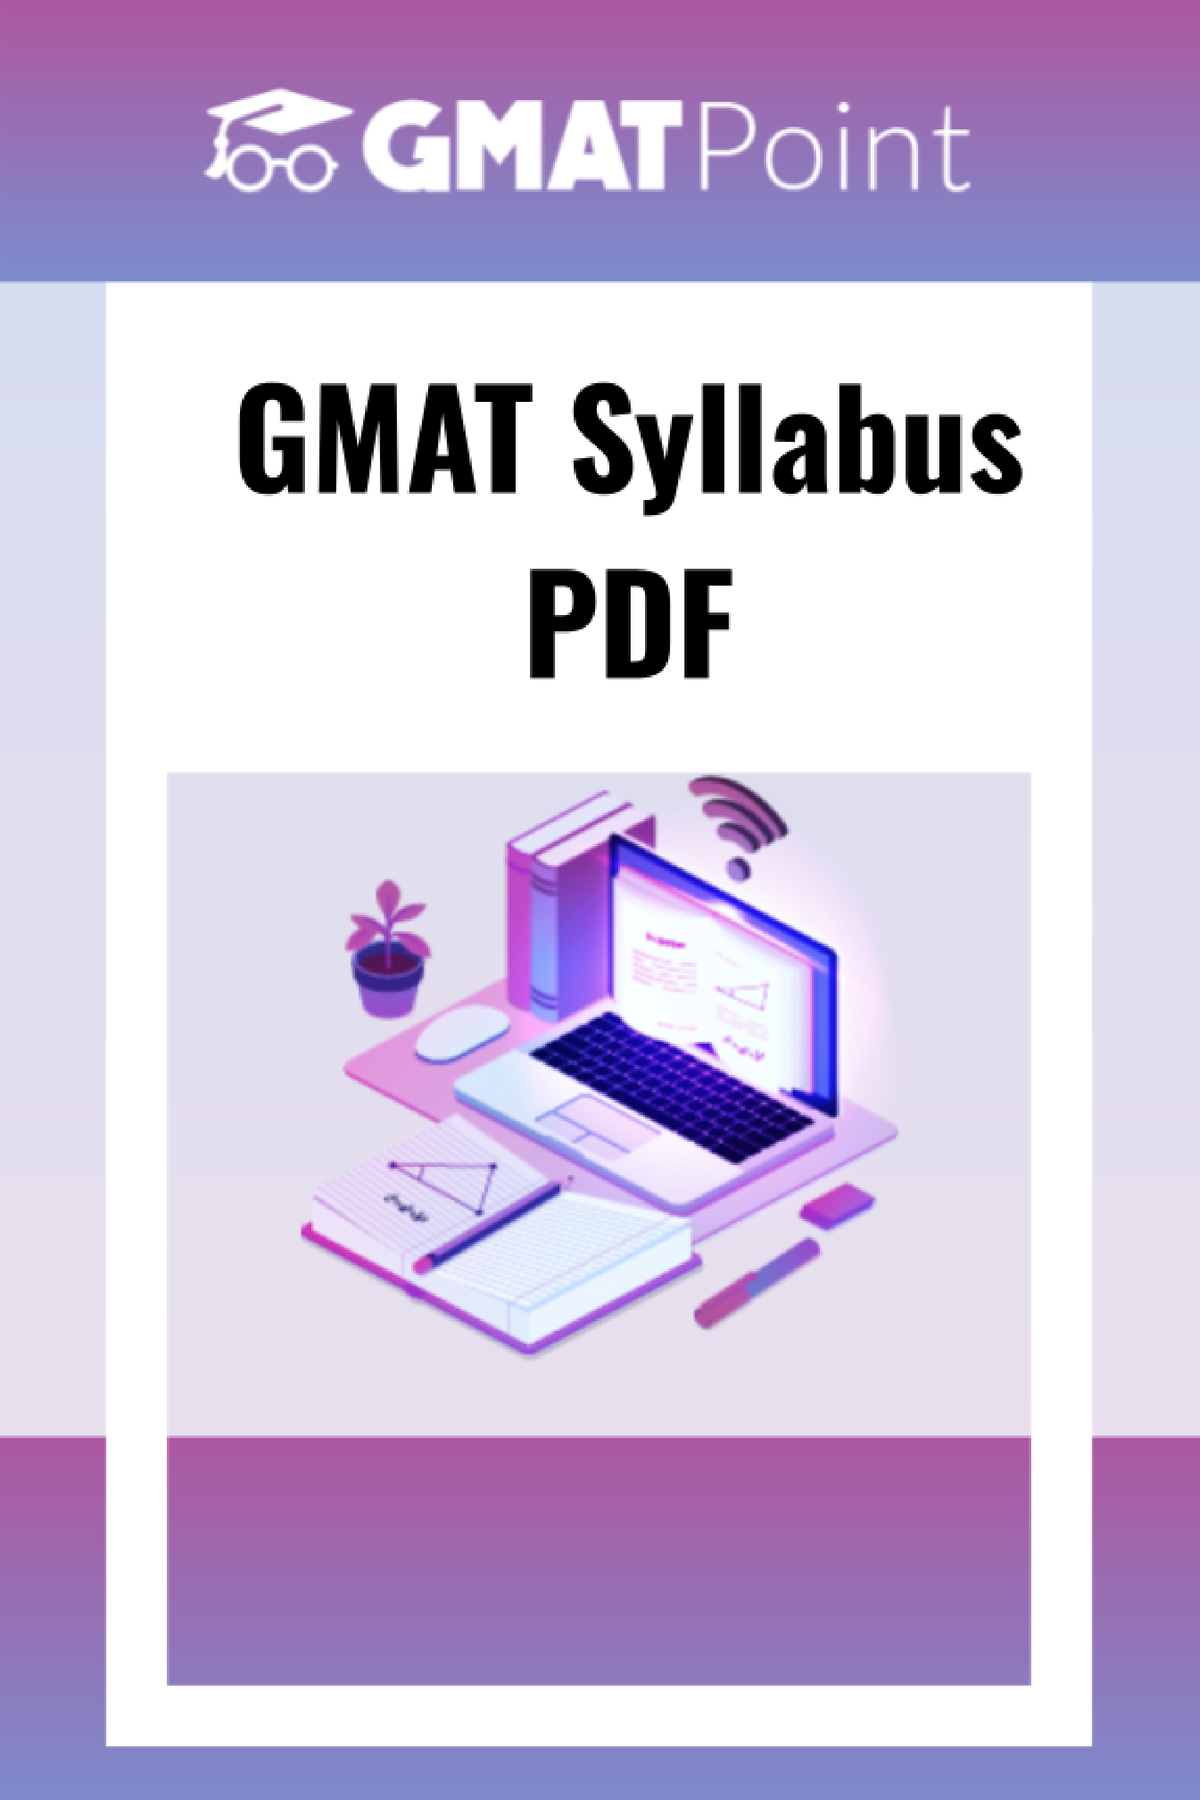 GMAT Syllabus PDF GMAT Syllabus PDF The GMAT Exam syllabus is divided